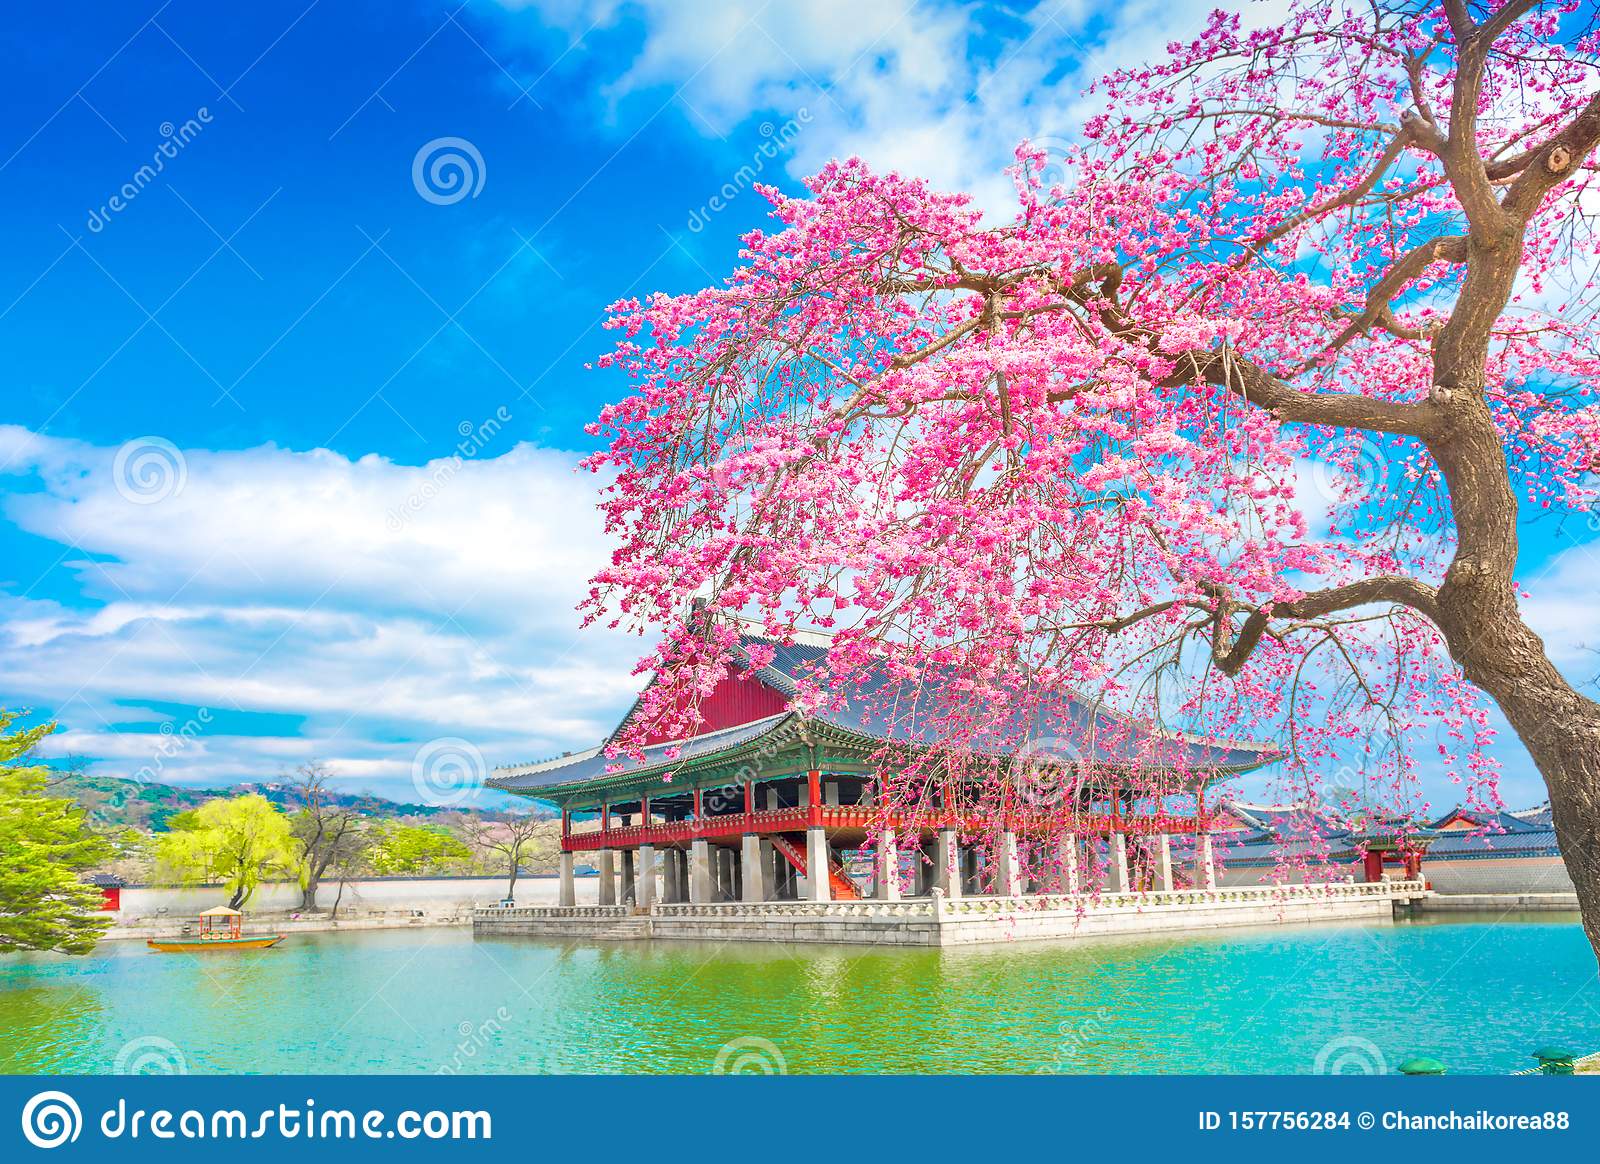 Gyeongbokgung palace with cherry blossom tree in spring time in seoulsouth korea stock photo